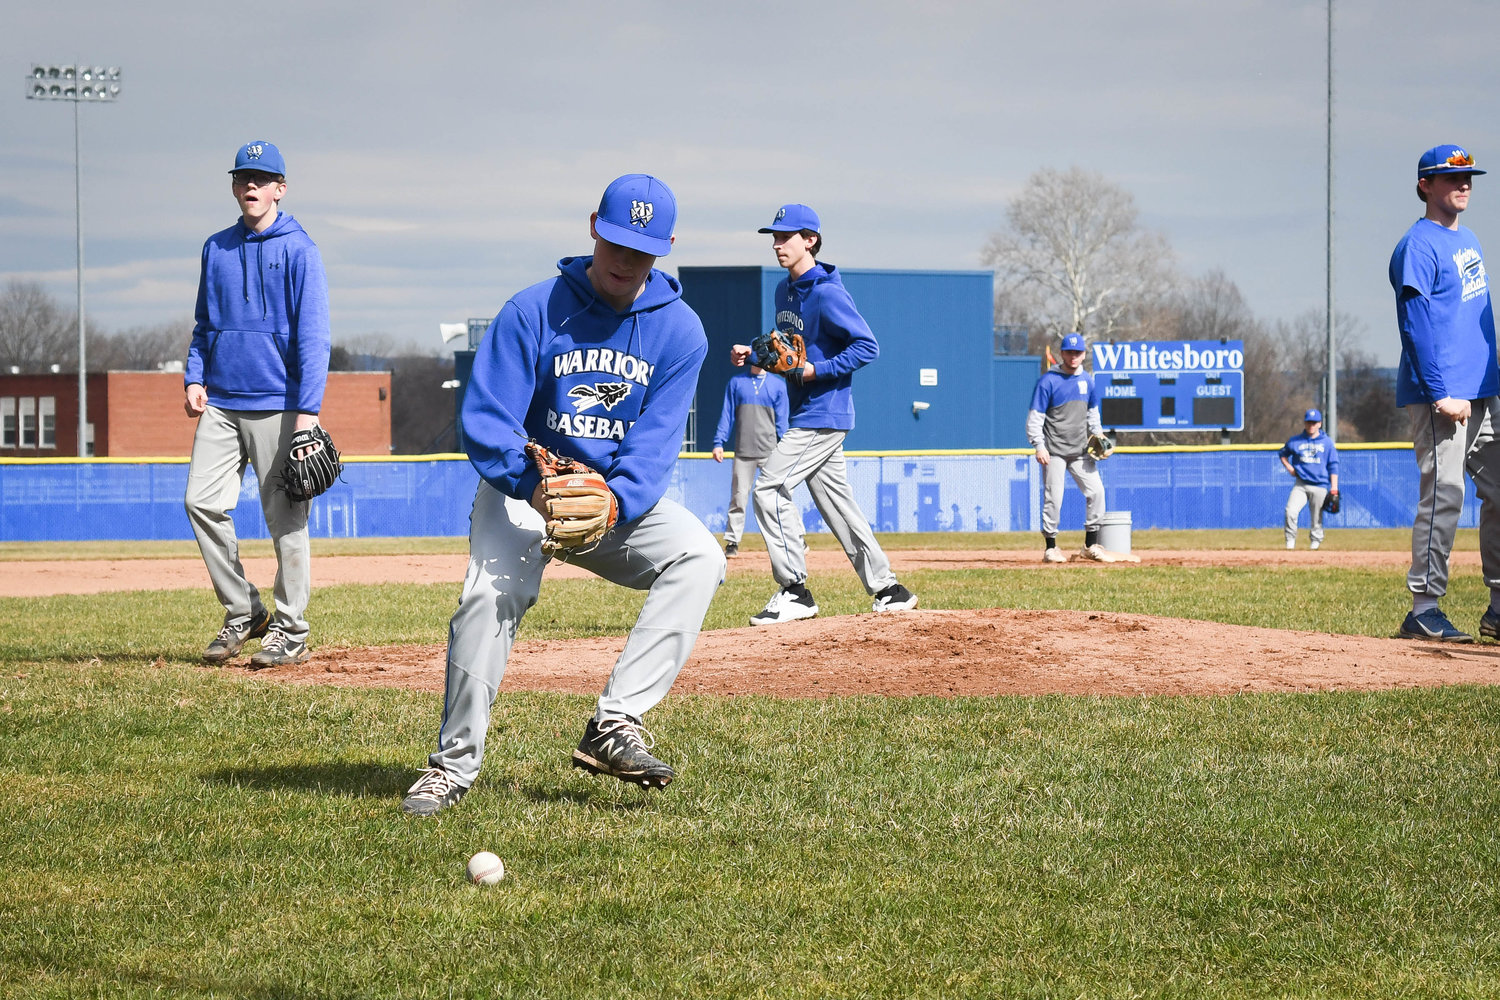 EYE ON THE BALL — Whitesboro players run pitcher fielding drills during practice on Tuesday. Whitesboro is coming off a 13-3 season and pitching is expected to be one key for the Warriors this season.